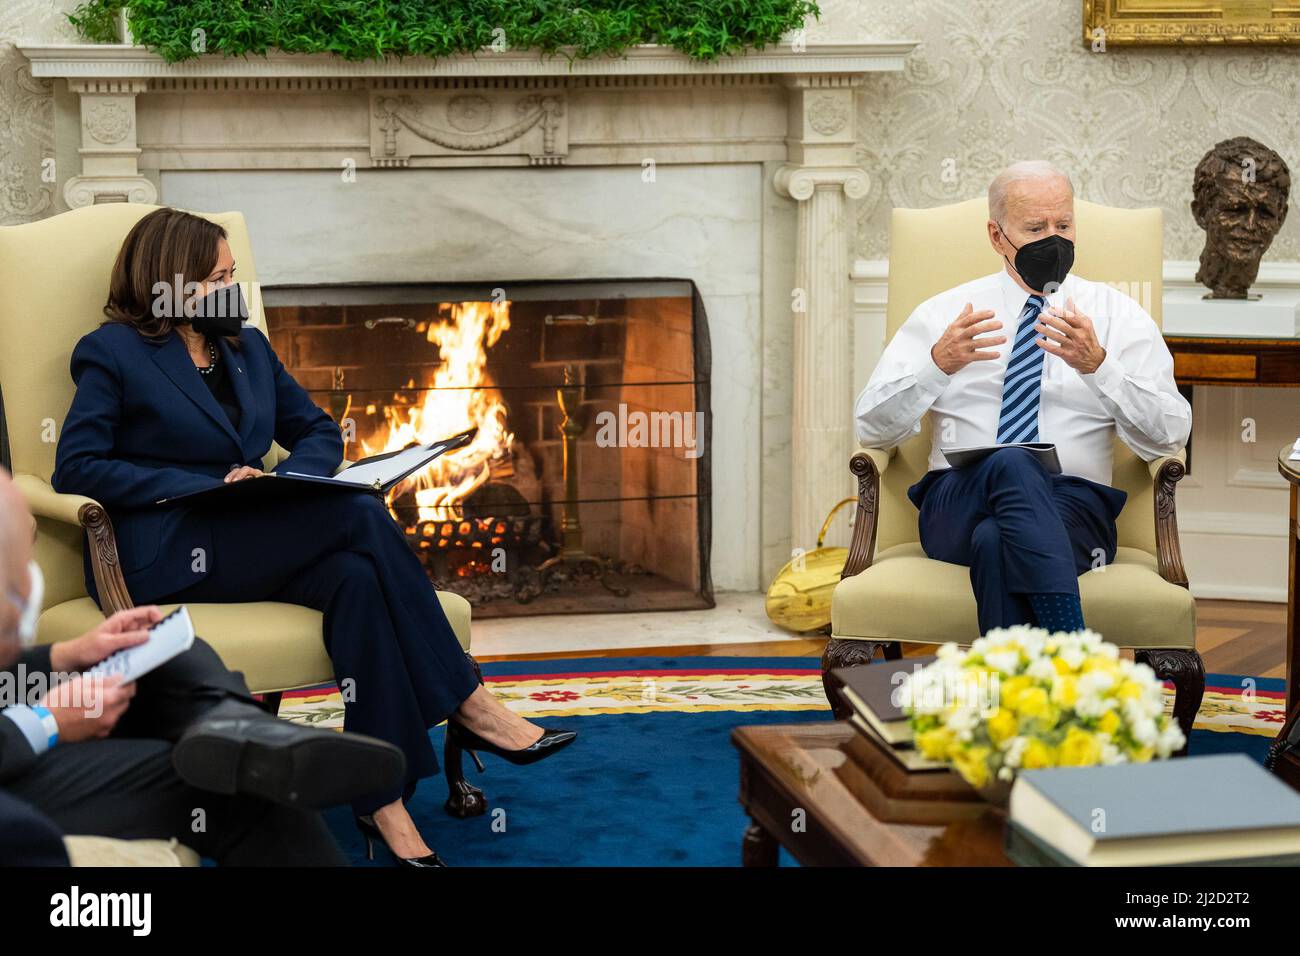 President Joe Biden and Vice President Kamala Harris meet with cabinet members and staff for a report of the Task Force on Worker Organizing and Empowerment, Friday, February 4, 2022, in the Oval Office of the White House. Stock Photo